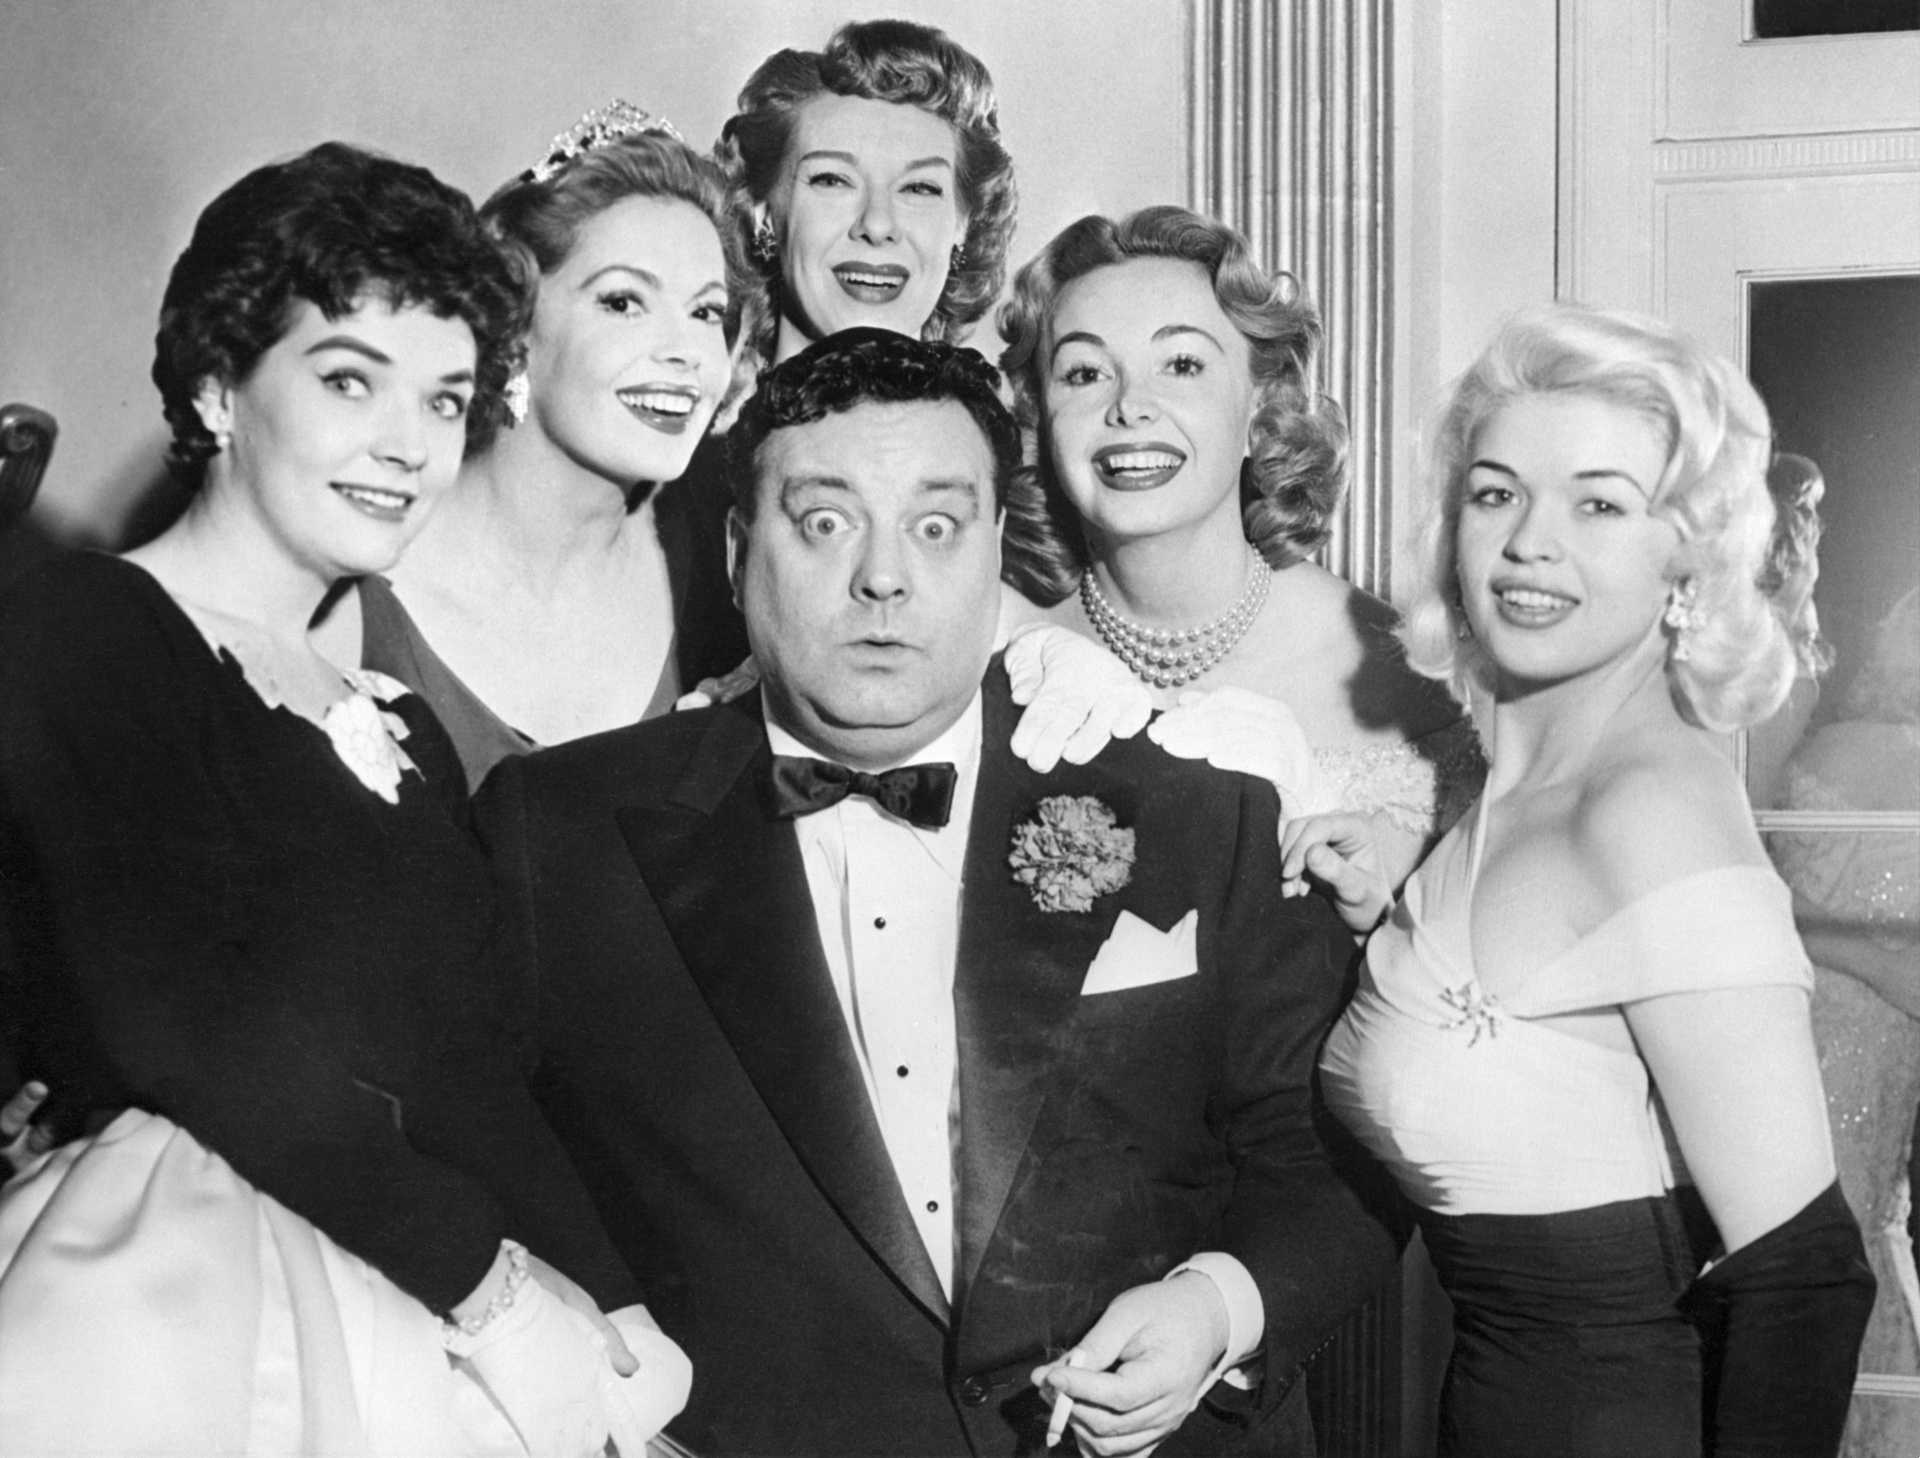 Jackie Gleason and friends | Bettmann / Contributor/Getty Images